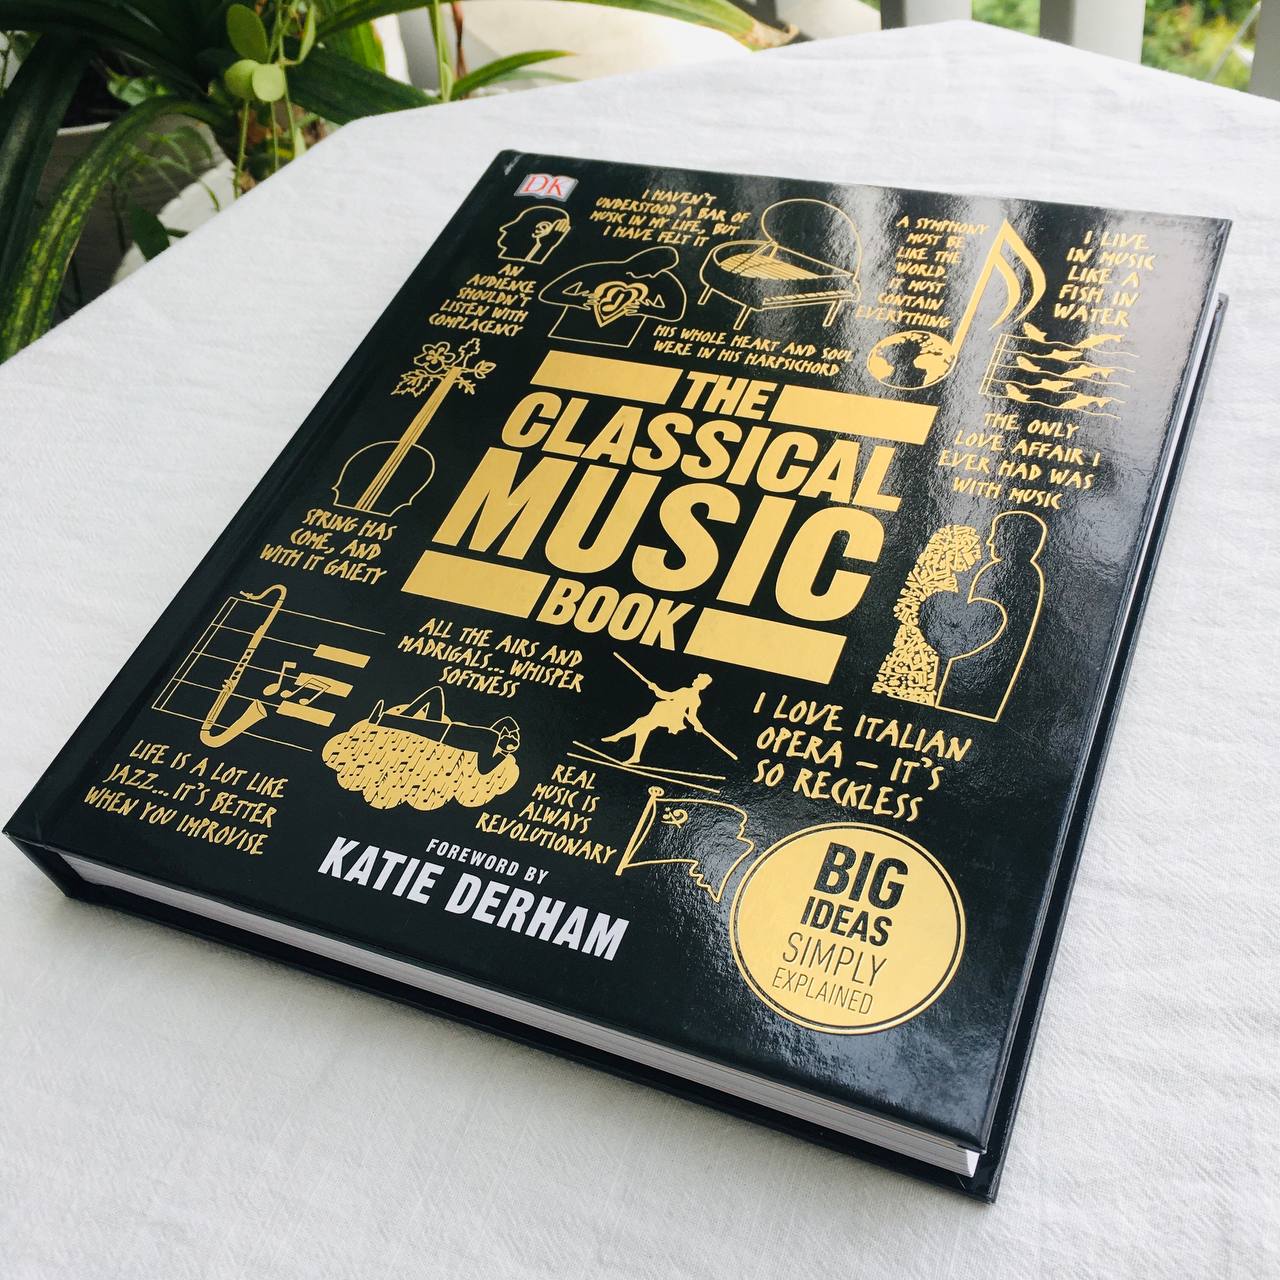 Sách DK books | The Big Ideas Simply Explained : The Classical Music Book